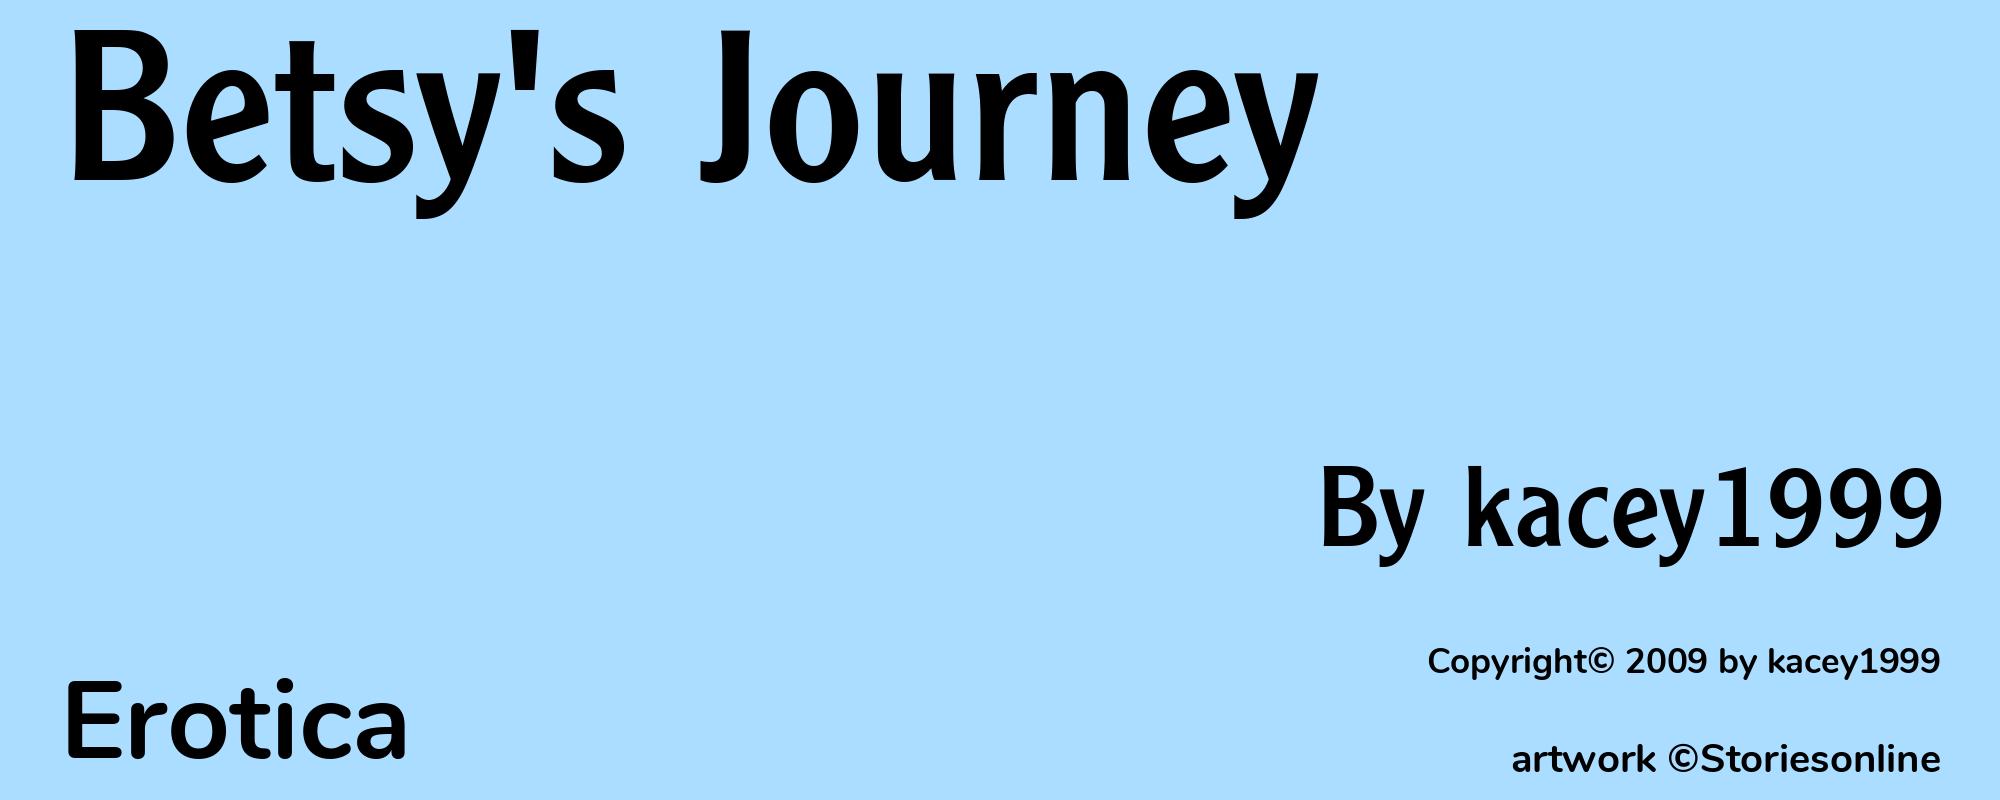 Betsy's Journey - Cover